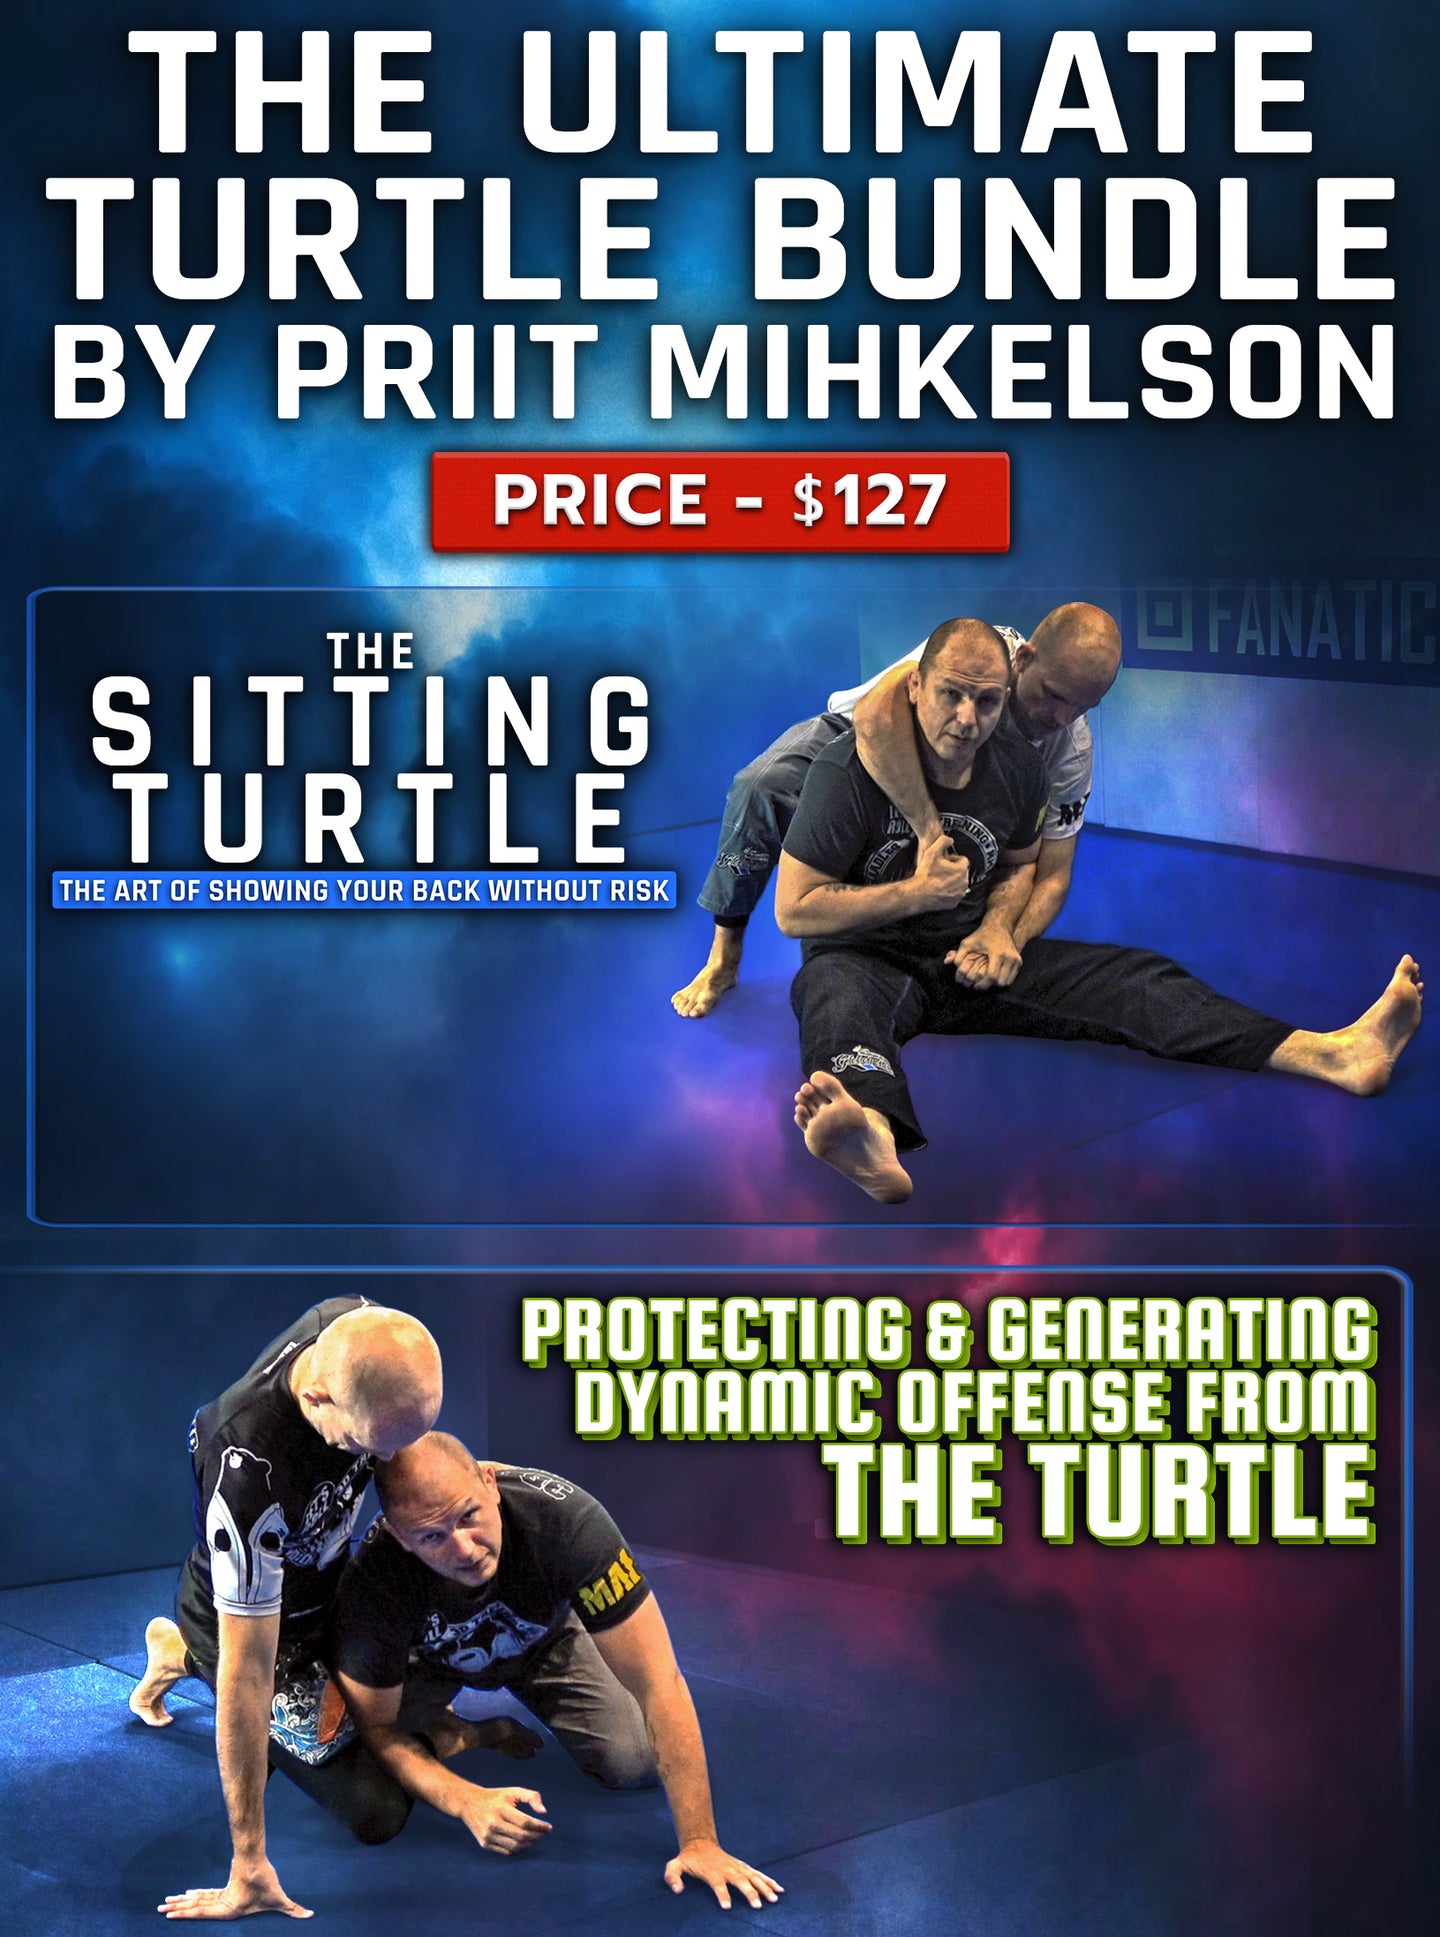 The Ultimate Turtle Bundle by Priit Mihkelson - BJJ Fanatics